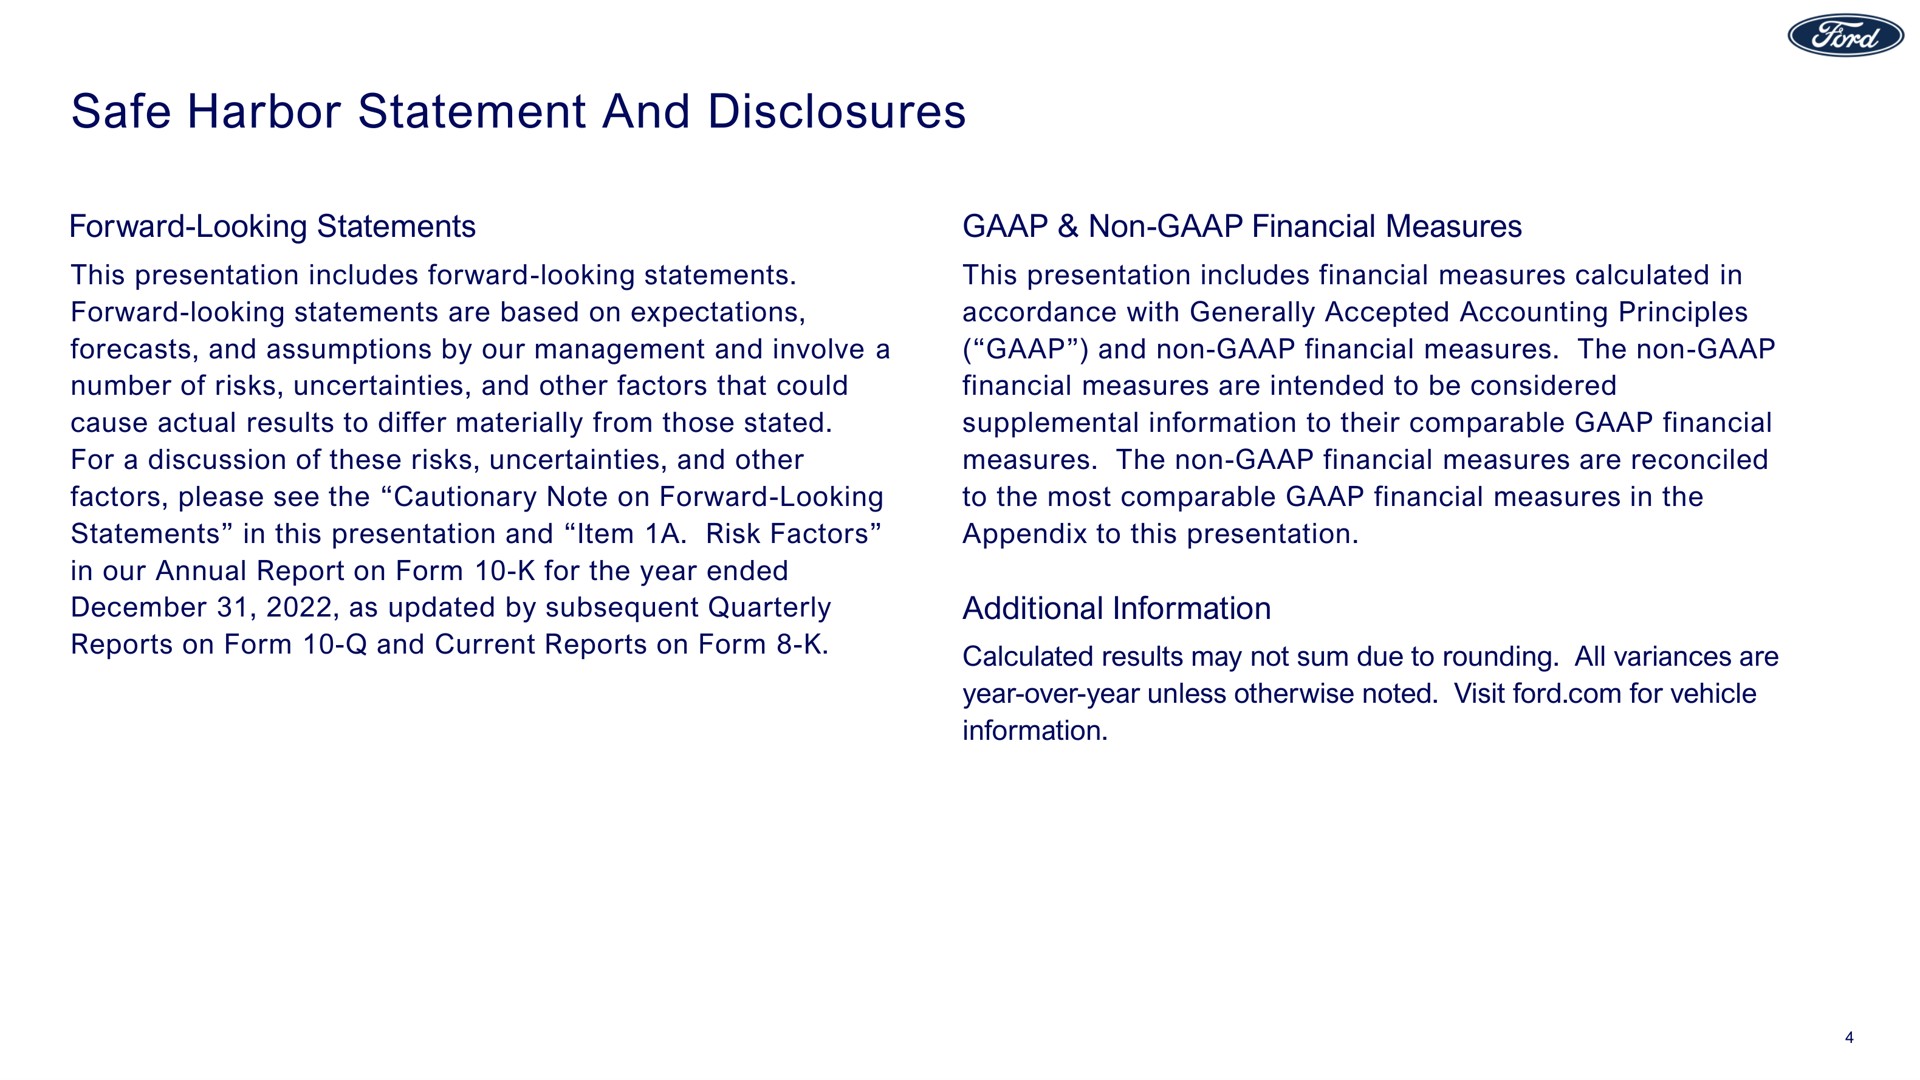 safe harbor statement and disclosures | Ford